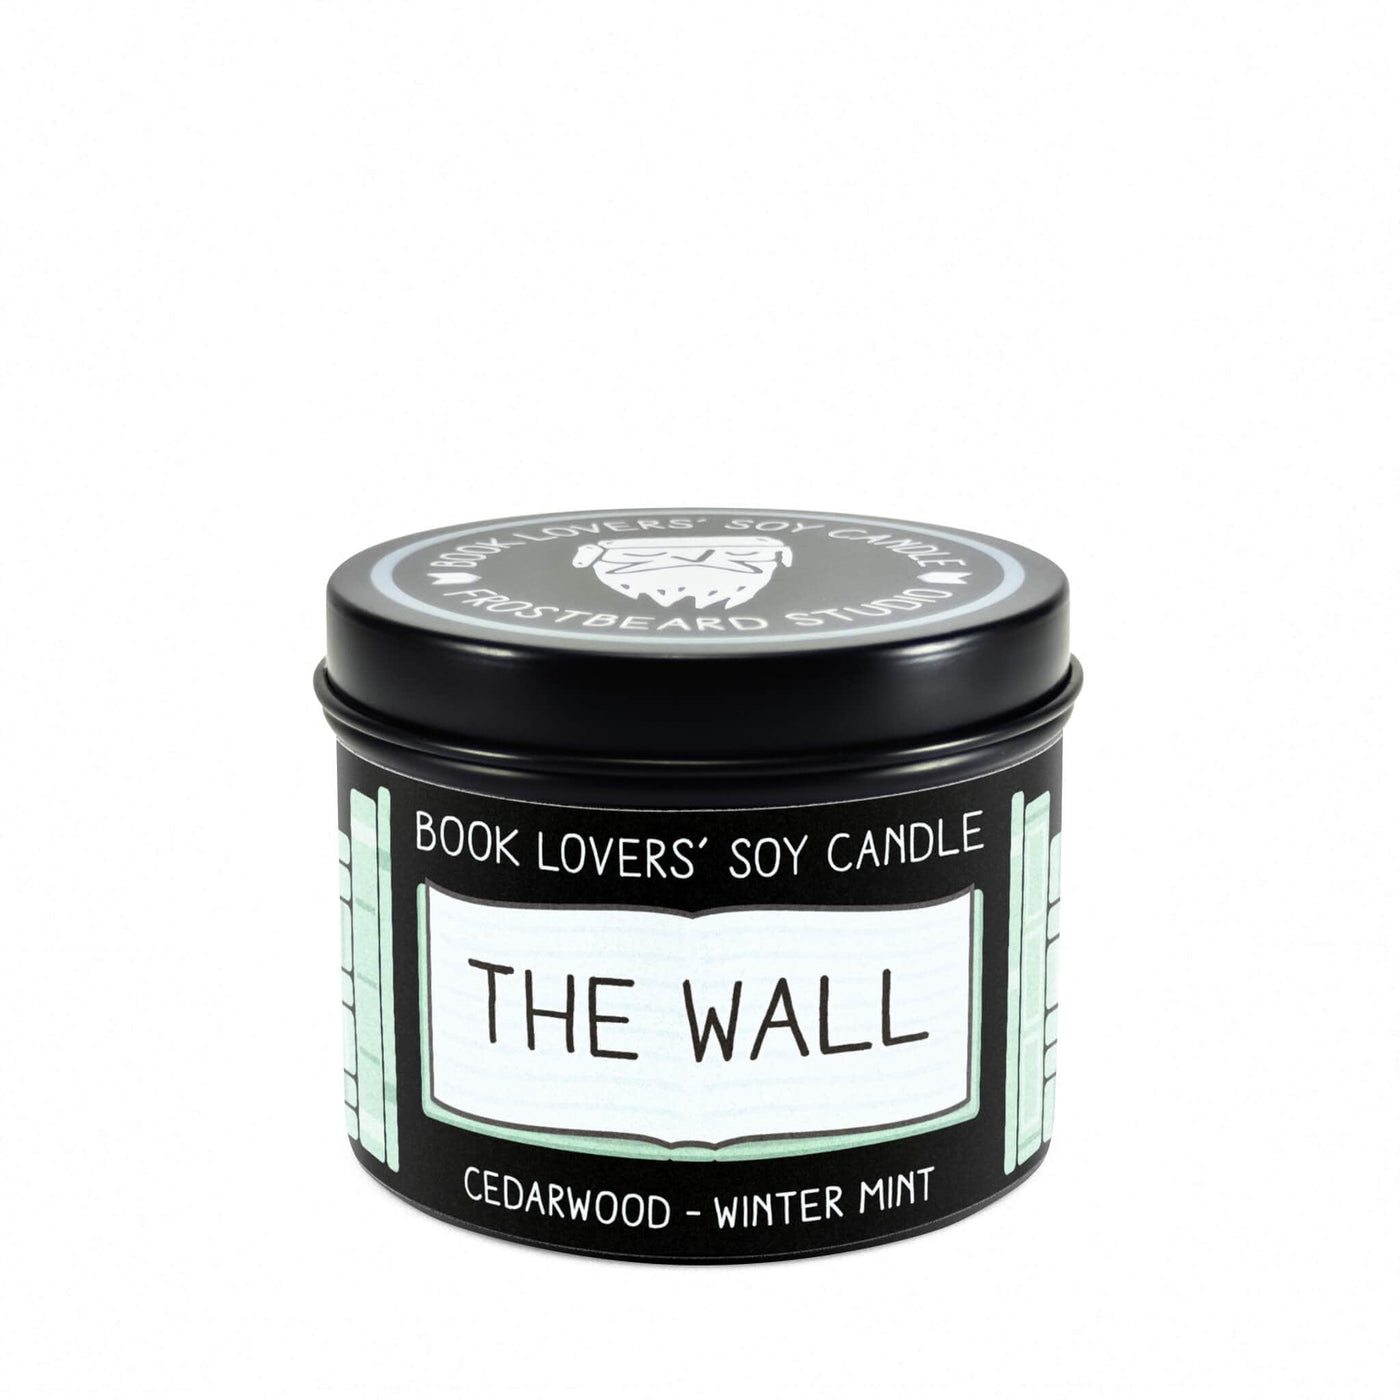 The Wall  -  4 oz Tin  -  Book Lovers' Soy Candle  -  Frostbeard Studio